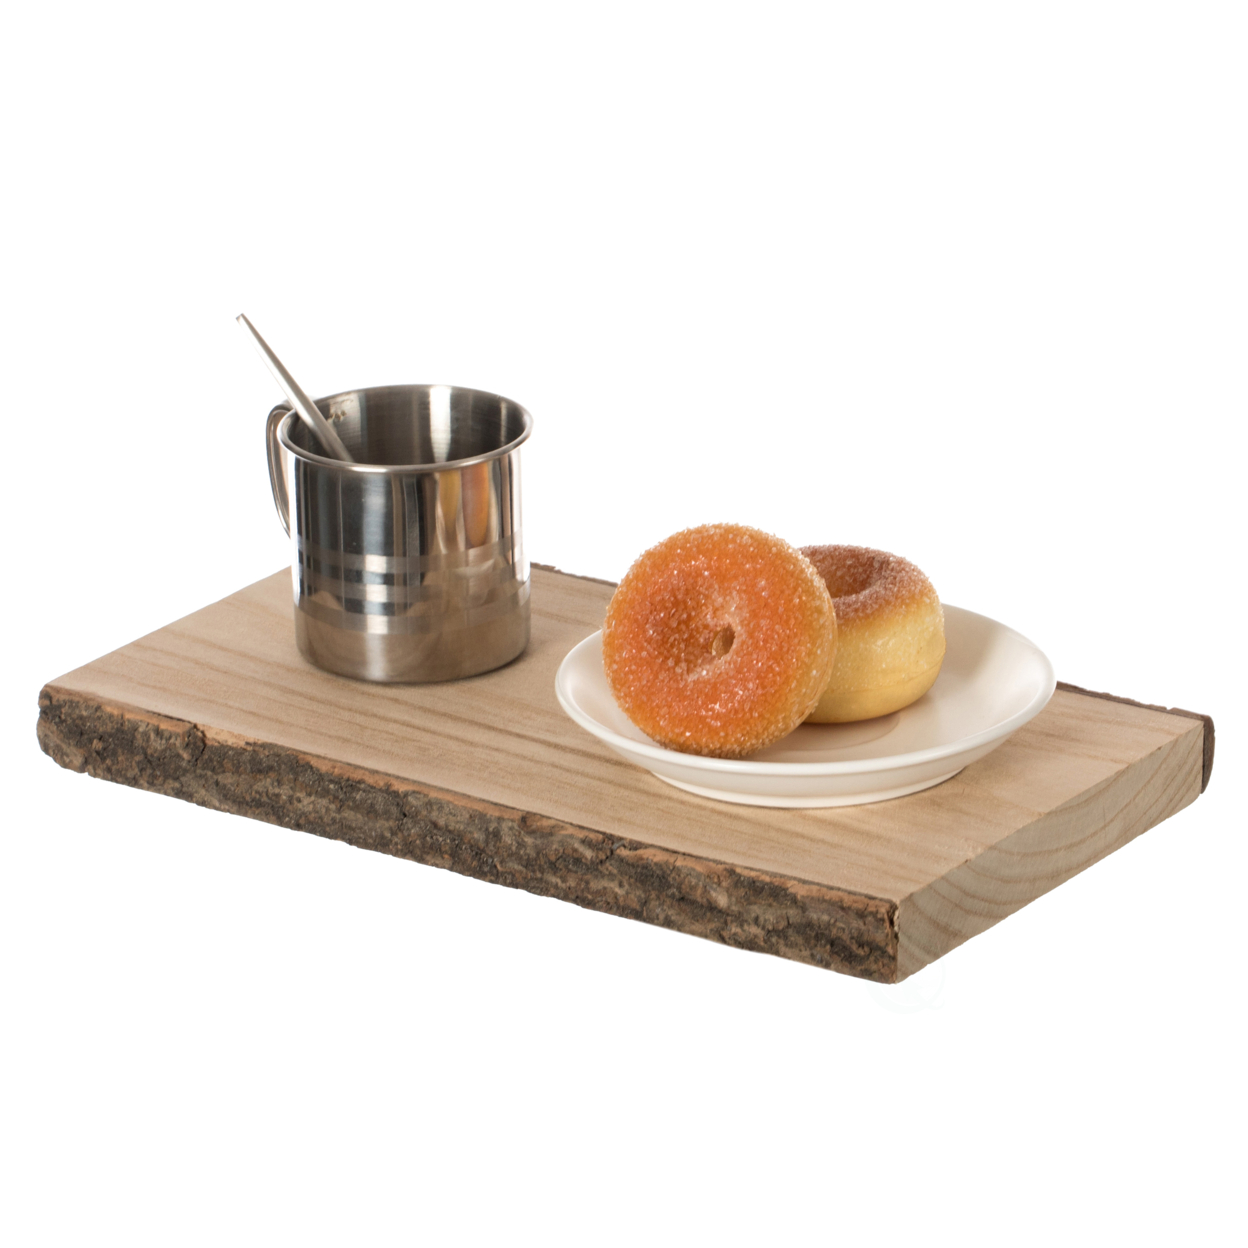 Rustic Natural Tree Log Wooden Rectangular Shape Serving Tray Cutting Board - Size